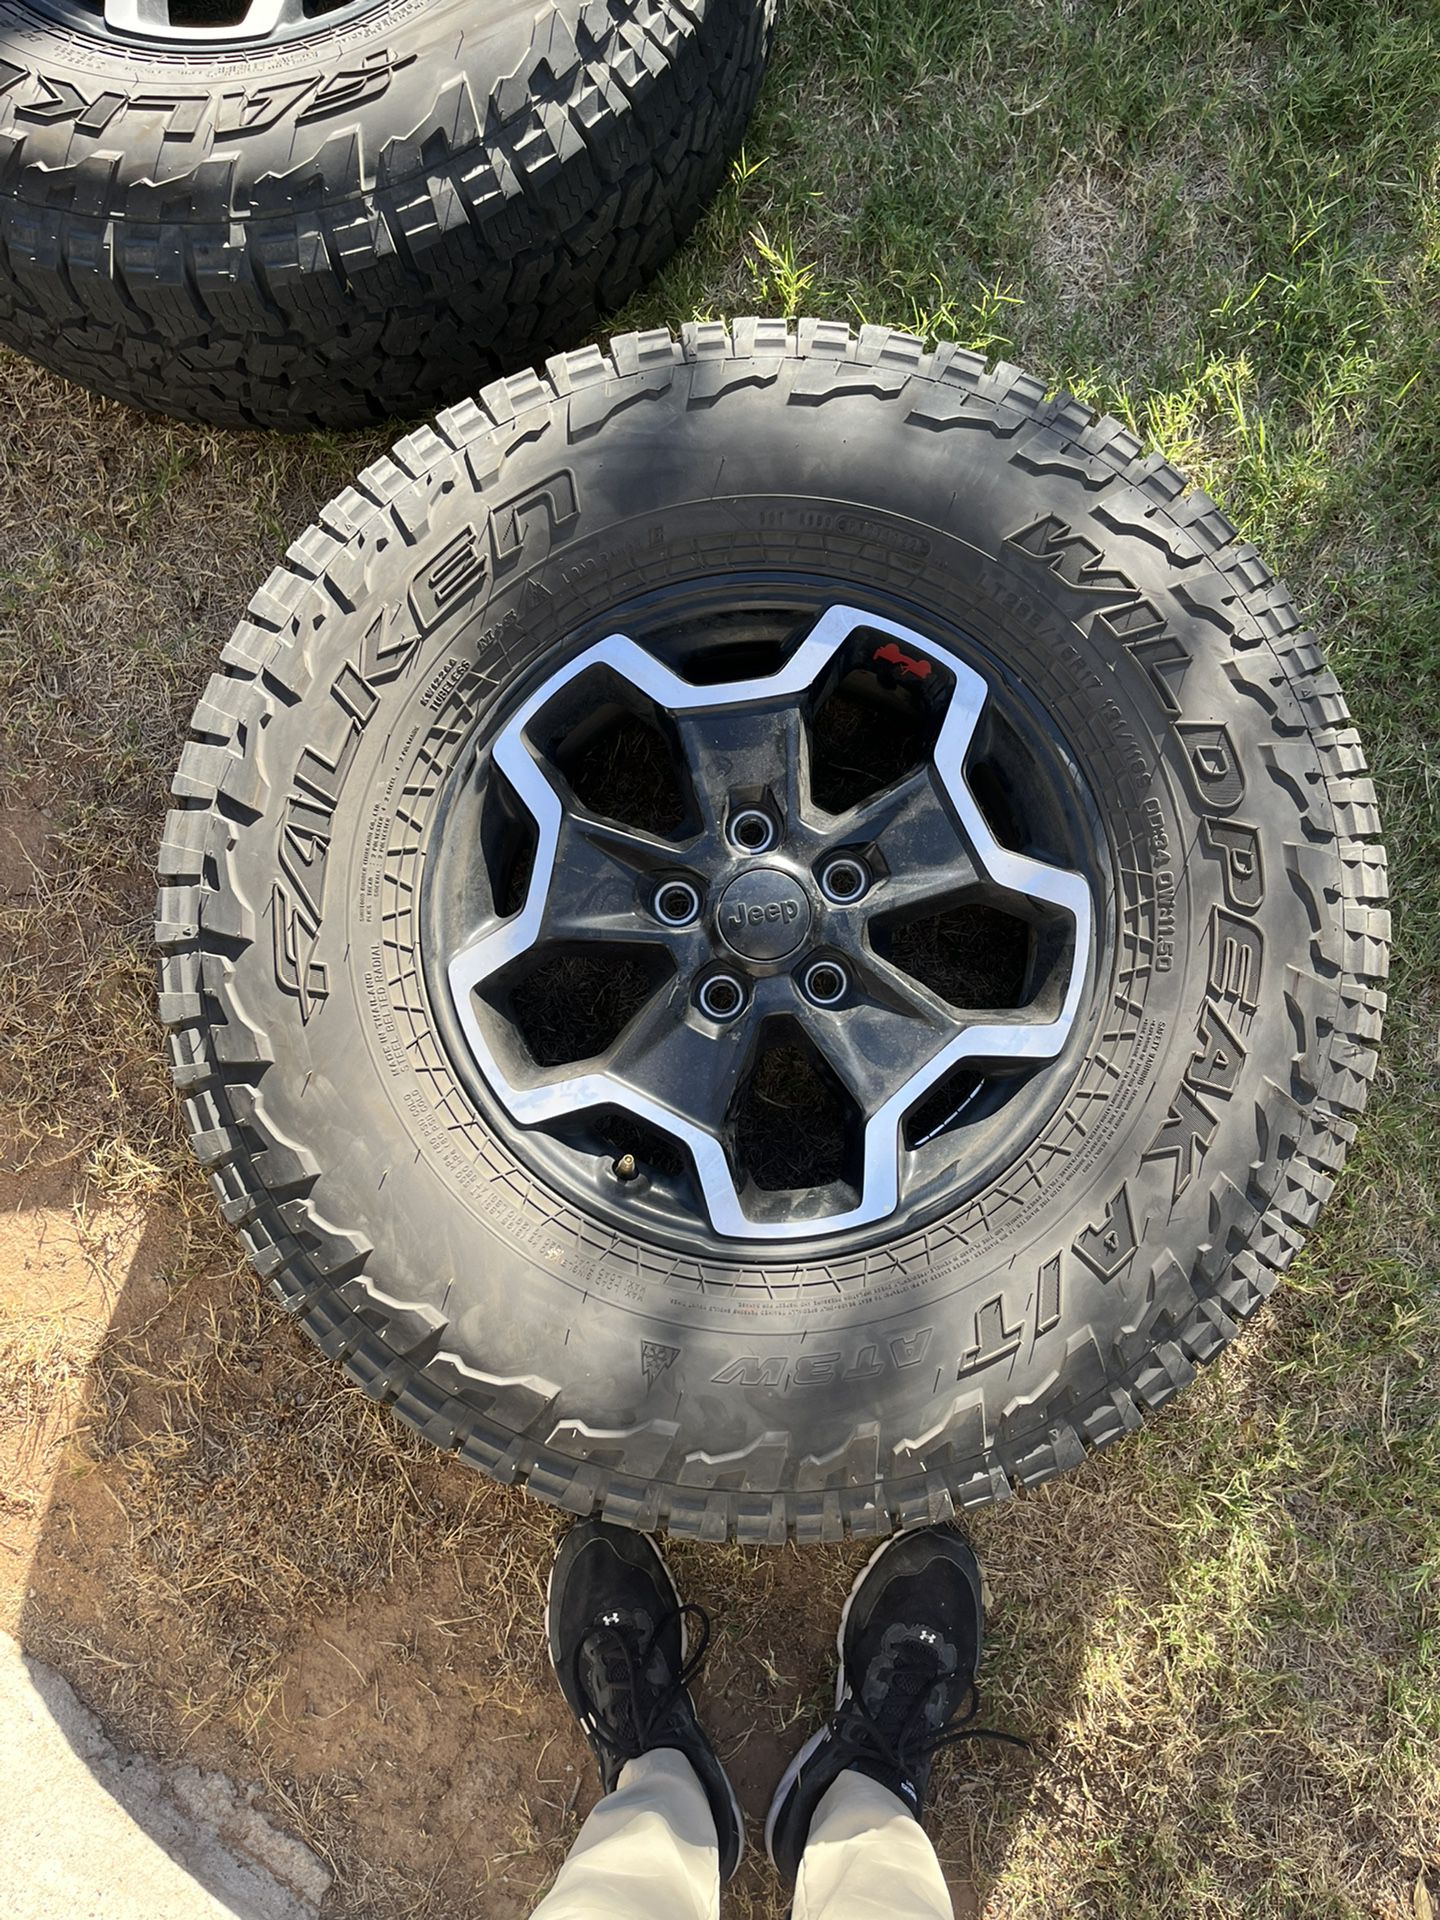 Jeep Gladiator And Wrangler Tire And Wheel Combo. 